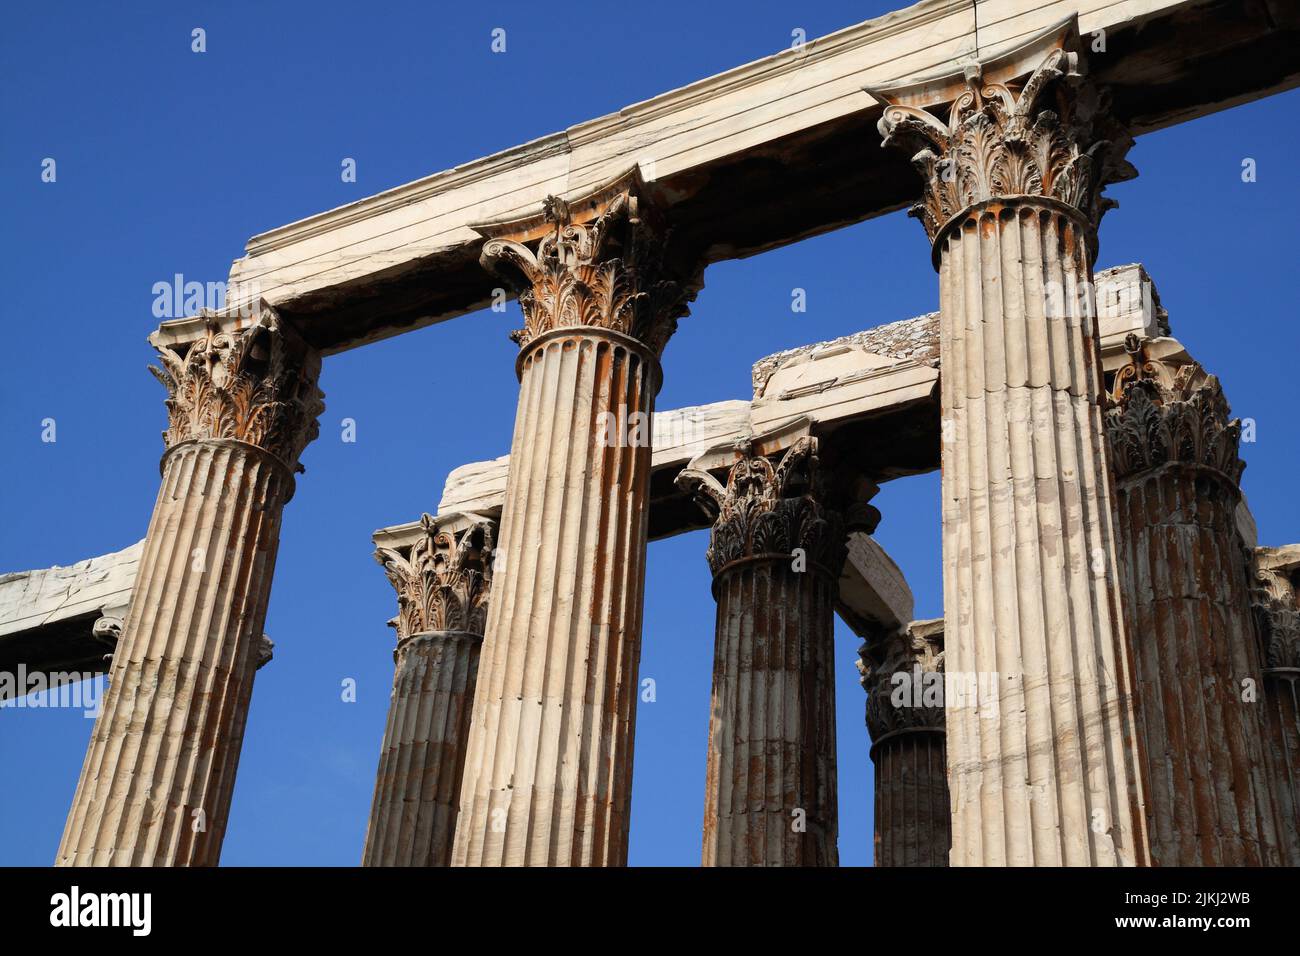 A scenic view of the Temple of Olympian Zeus against the blue sky, Athens, Greece Stock Photo